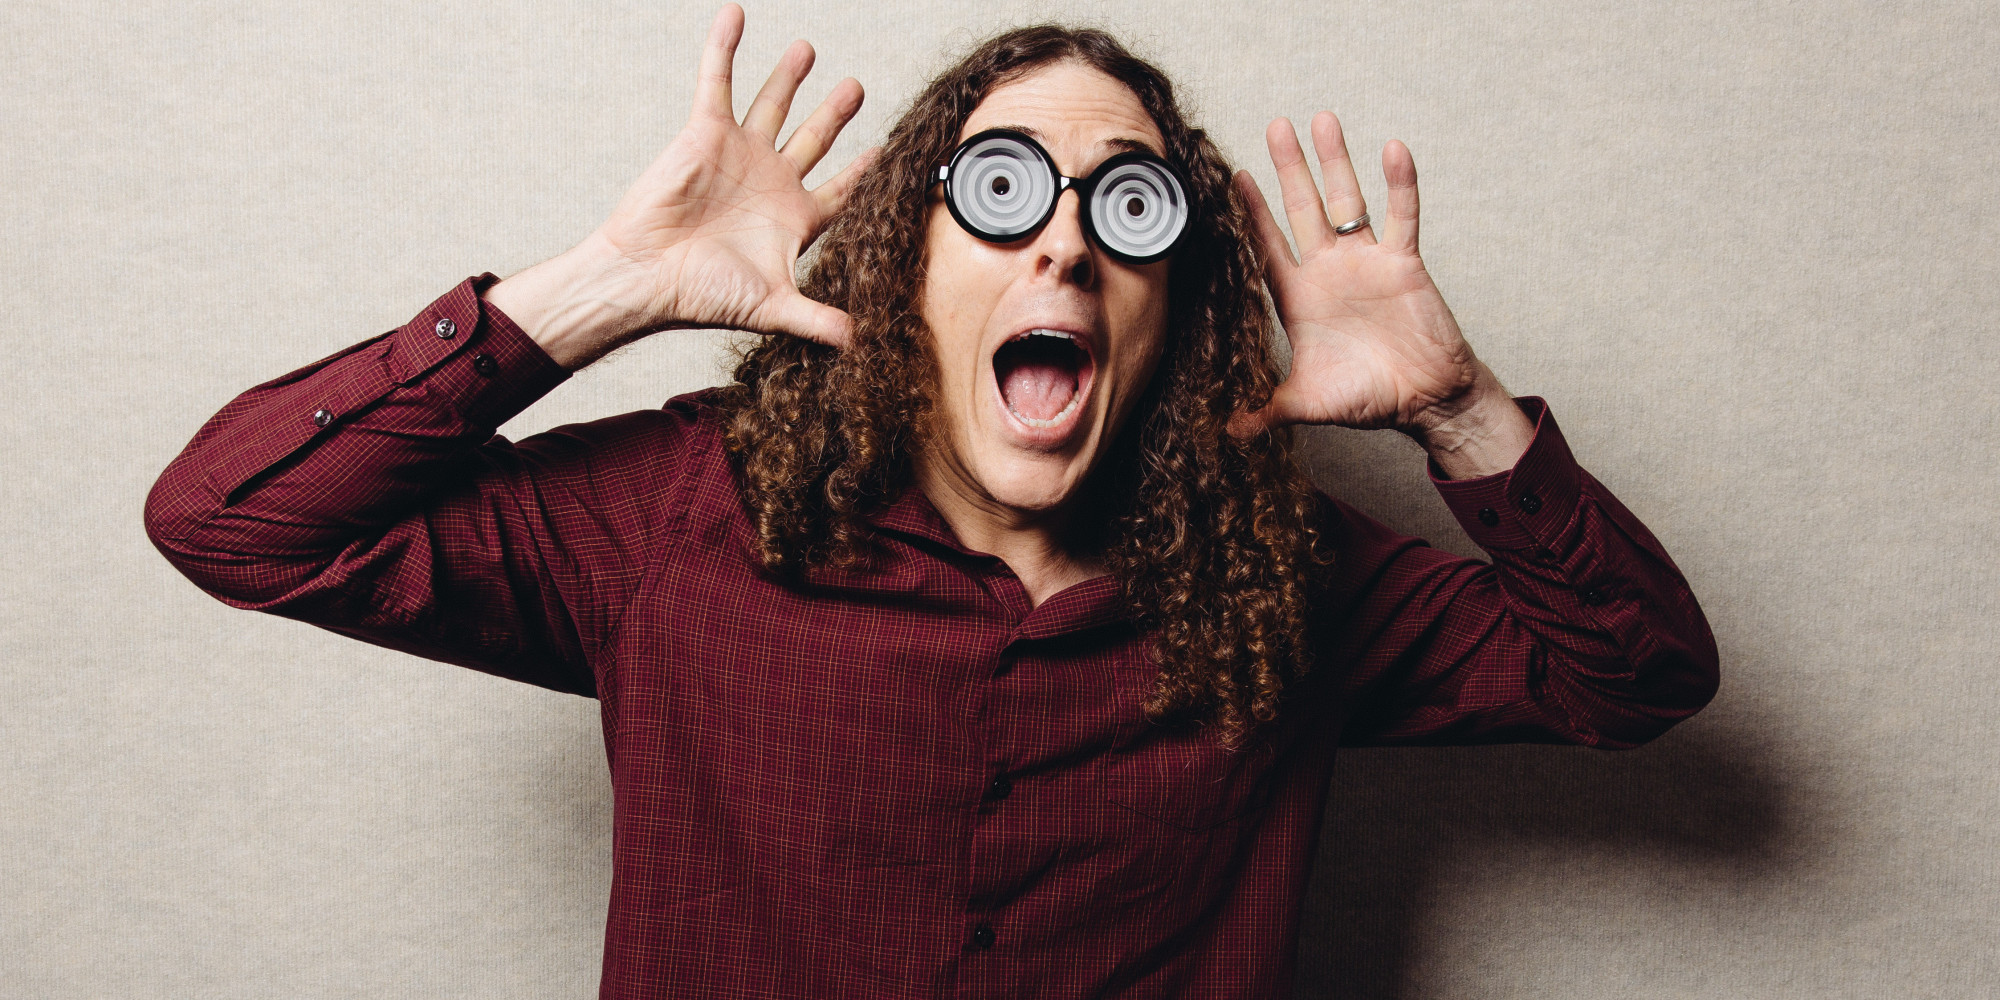 11 Wonderfully Weird Facts You Might Not Know About 'Weird Al' Yankovic2000 x 1000